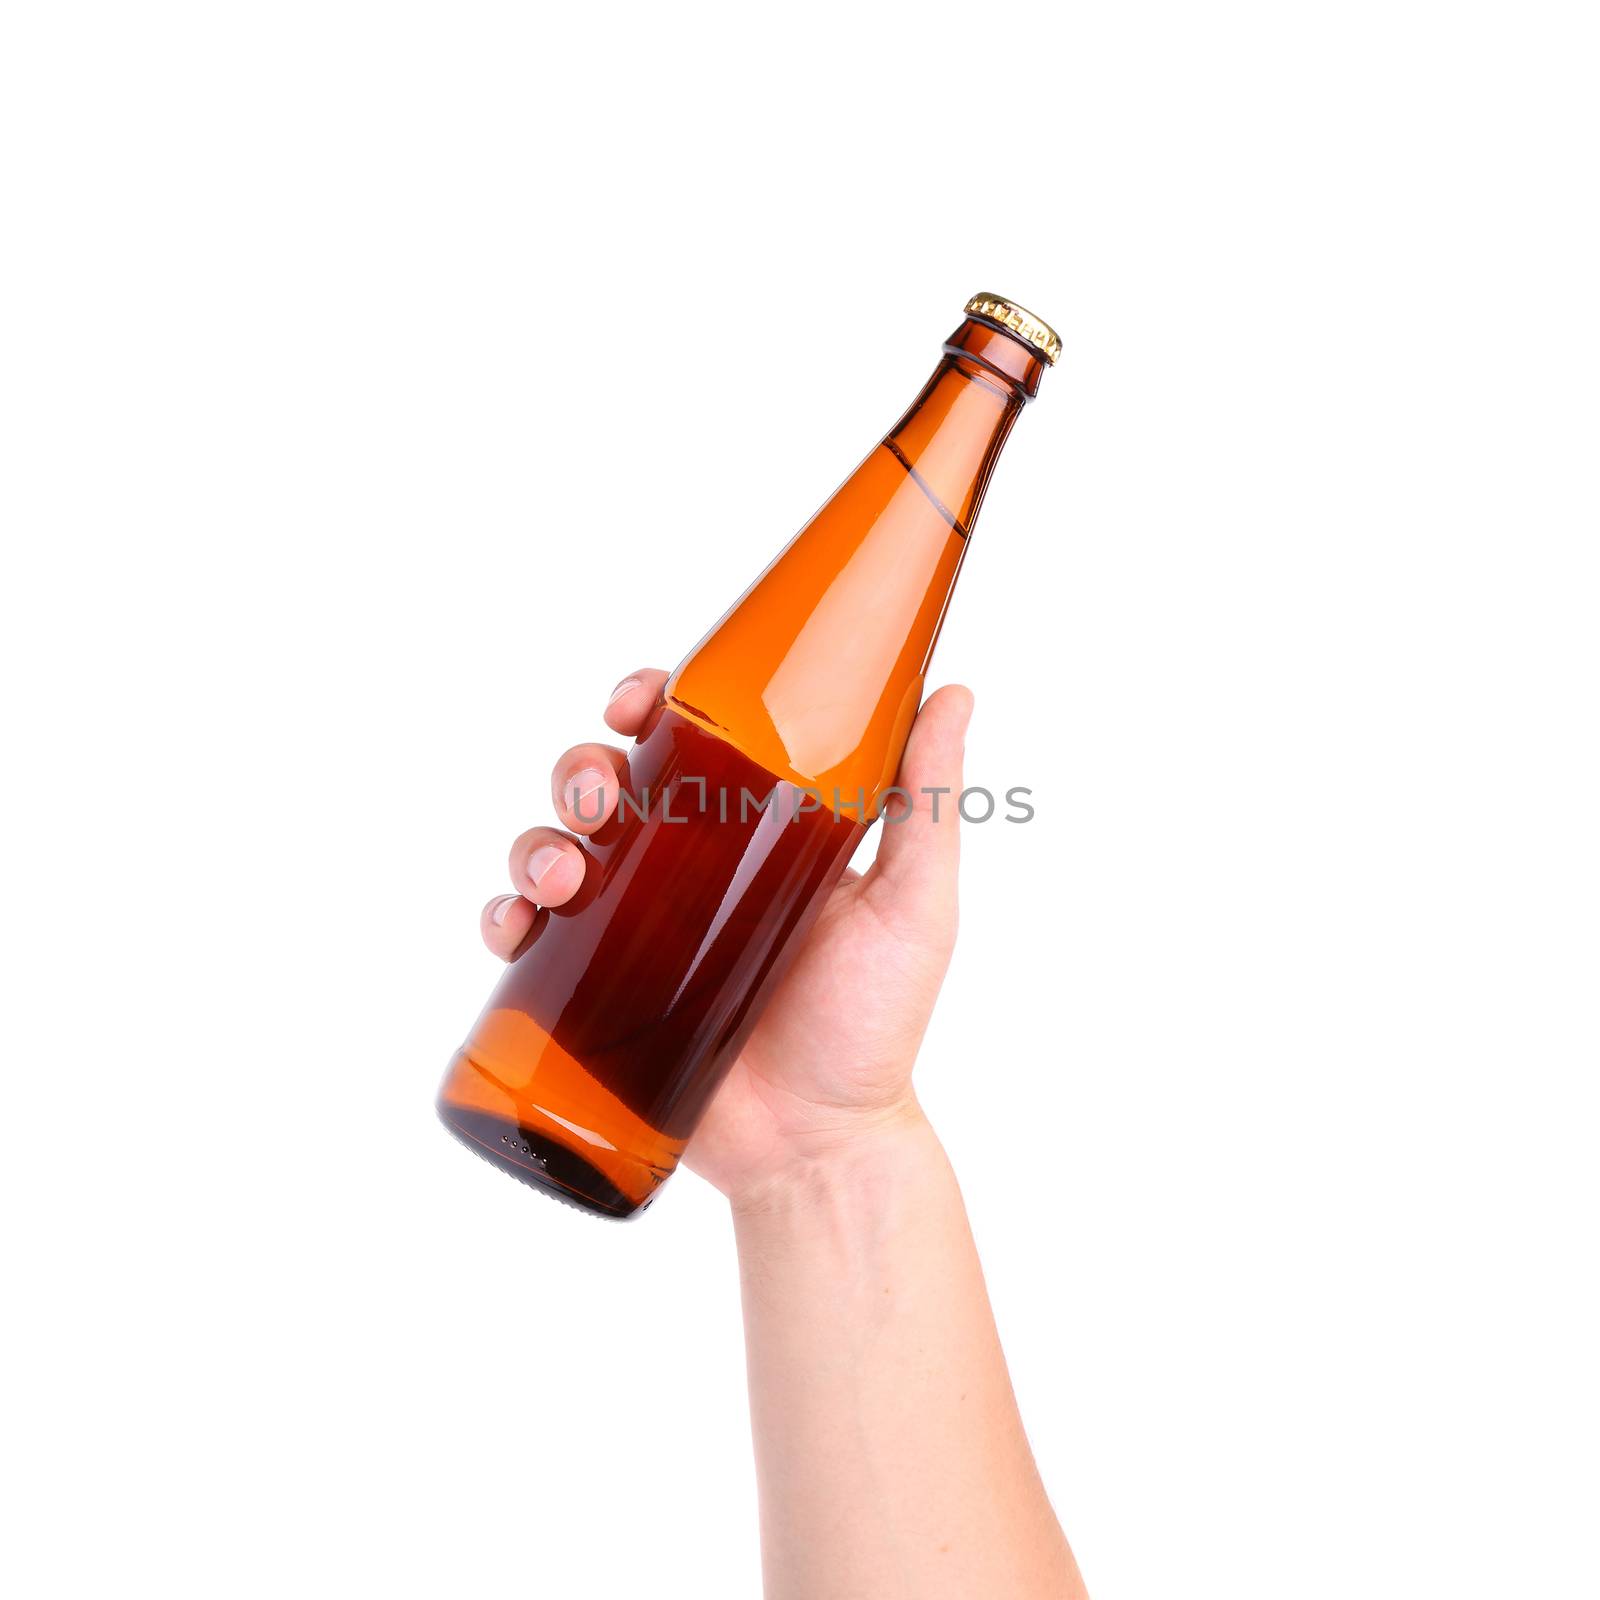 glass bottle in hand by indigolotos